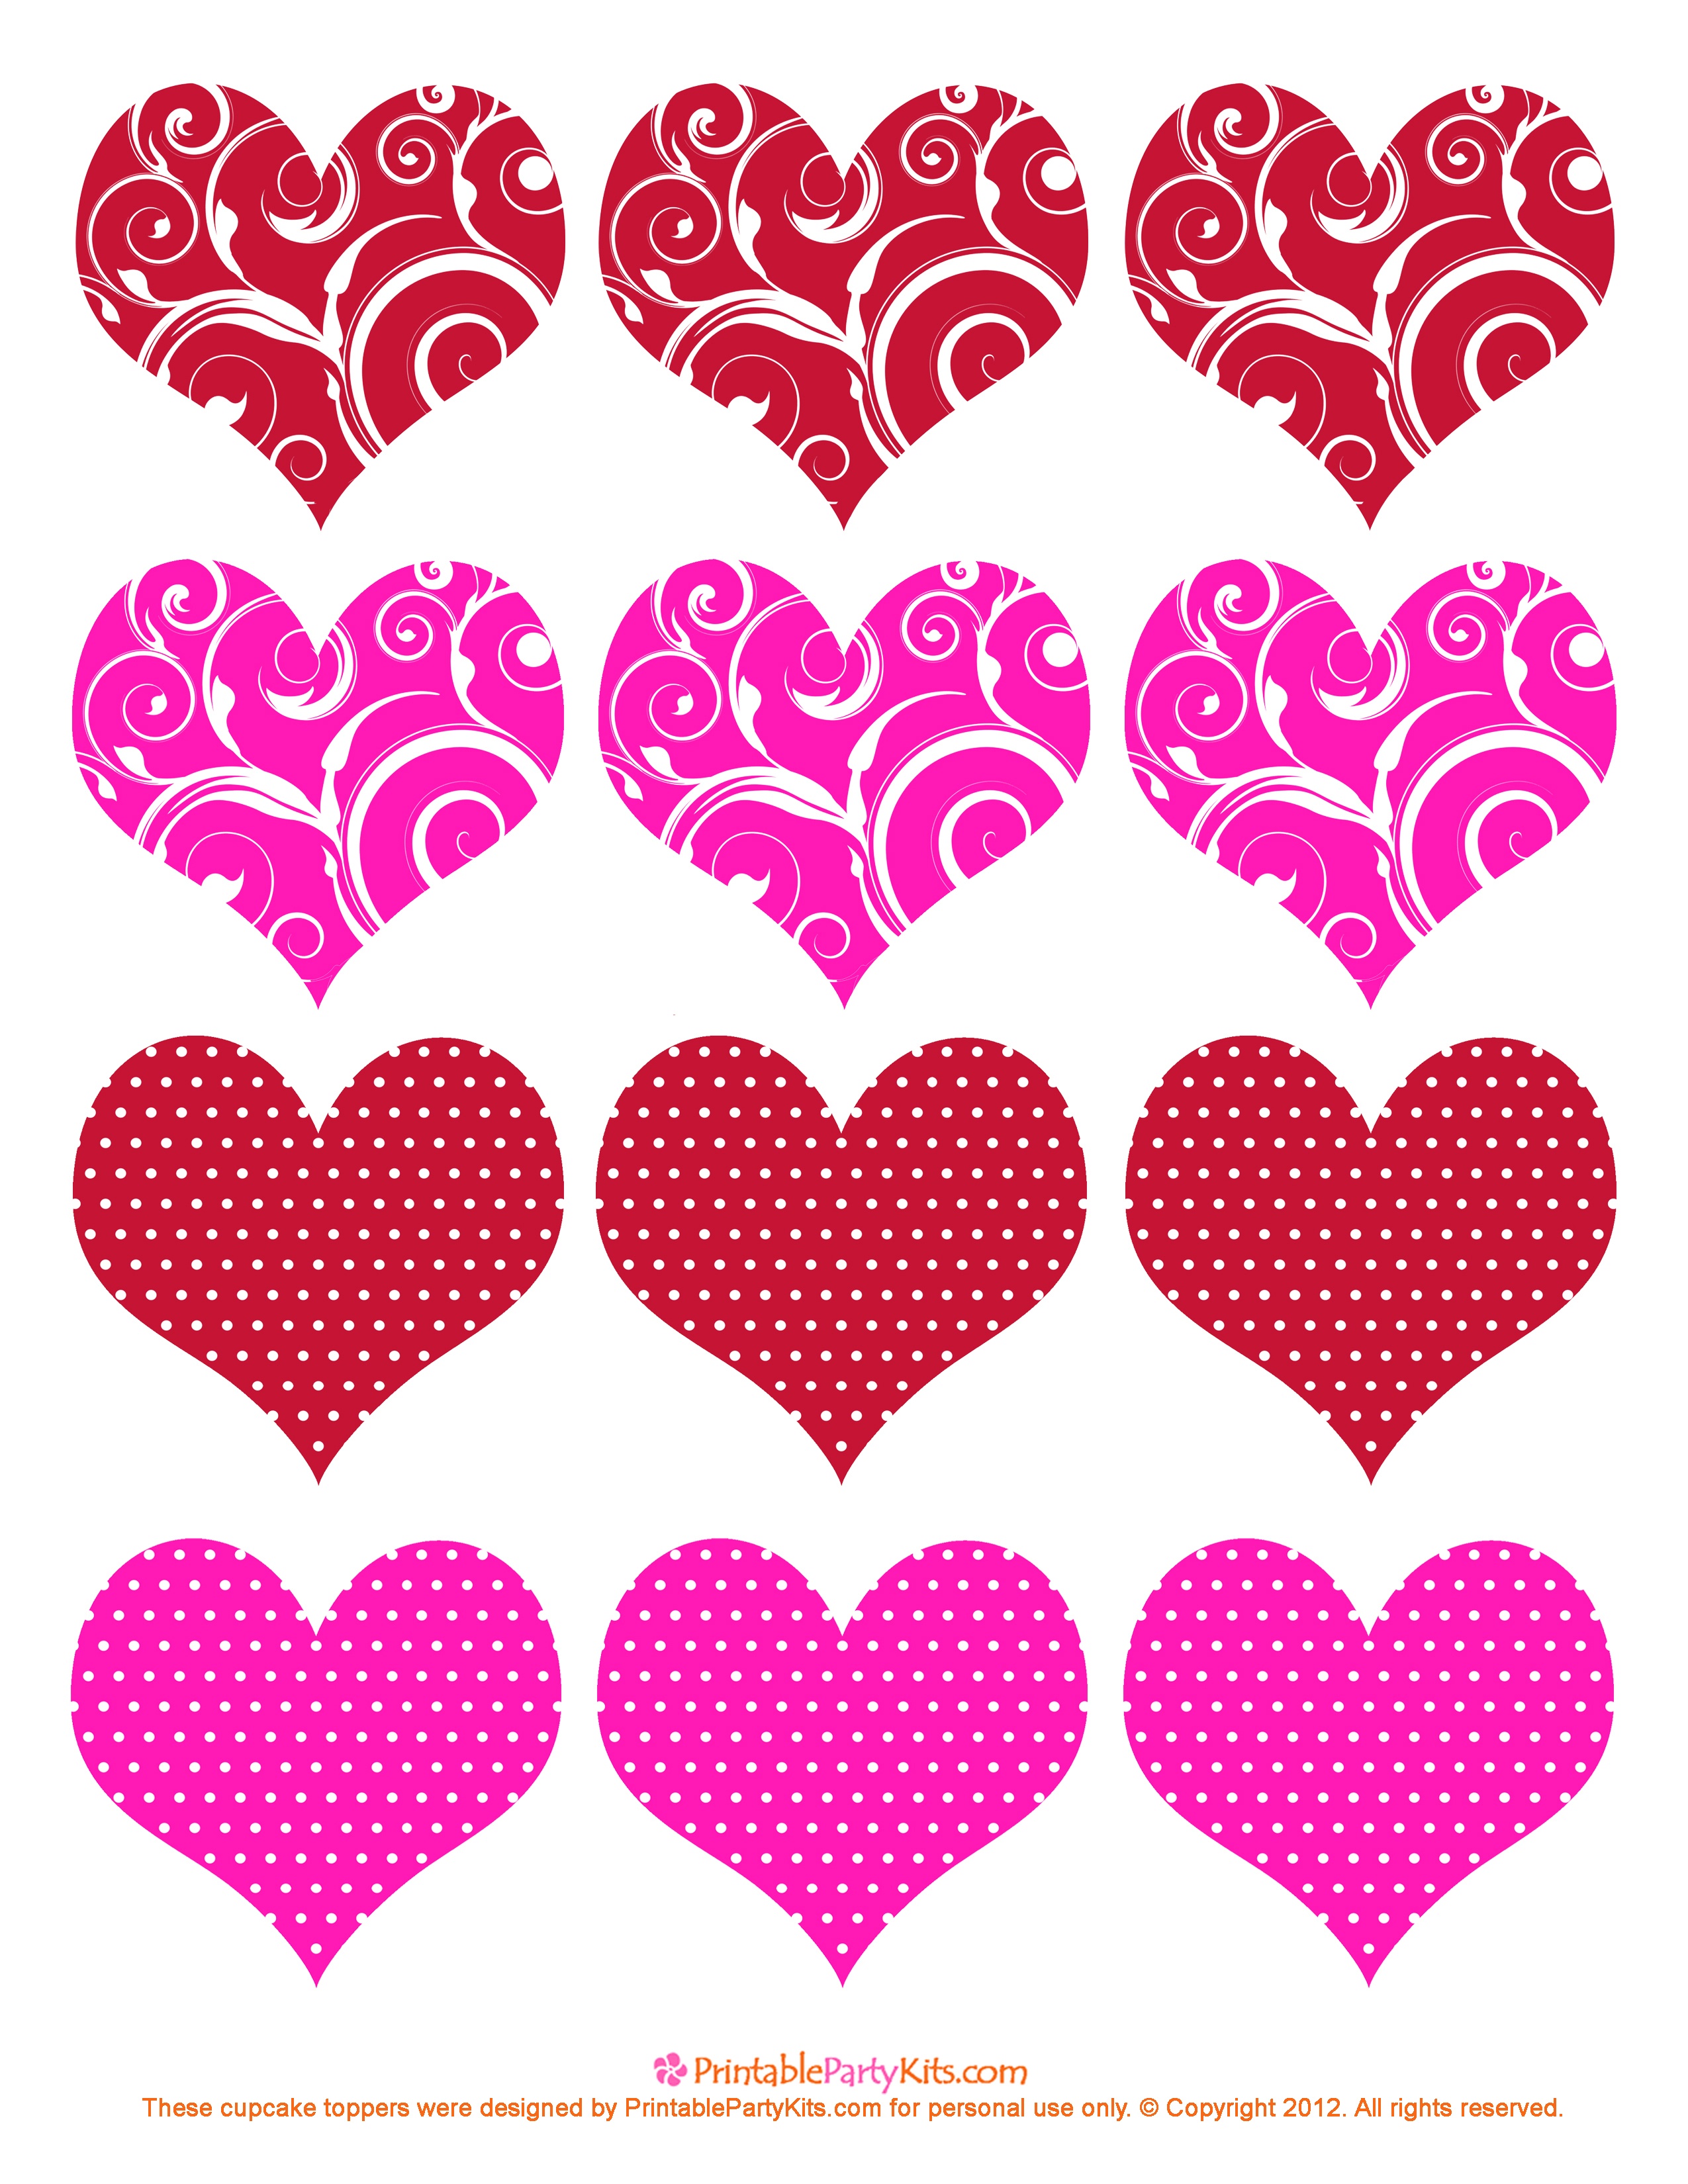 11 Valentine Heart Template Images - Free Printable Valentine Hearts - Free Printable Valentine Heart Patterns